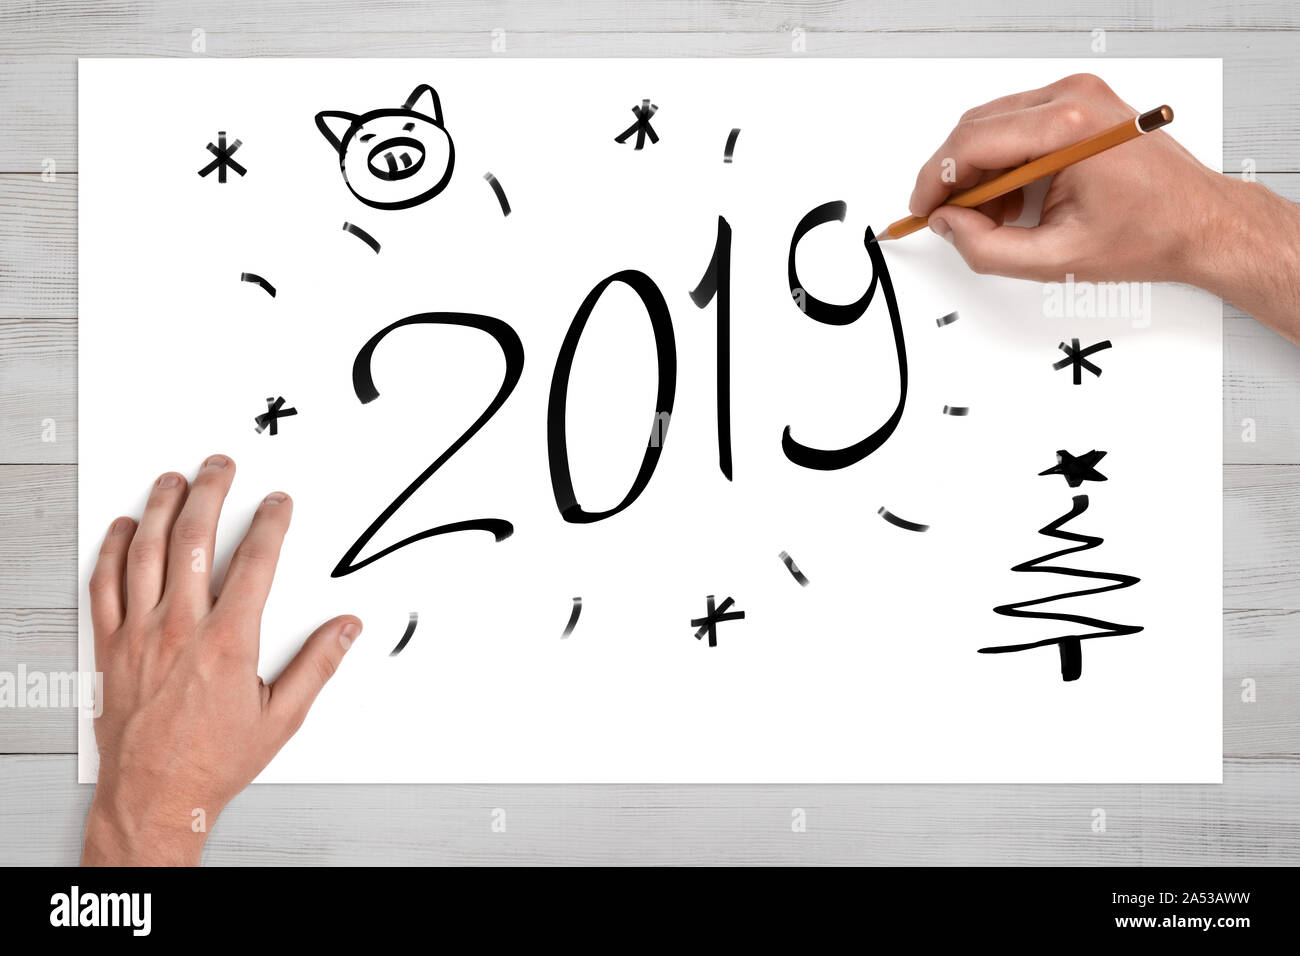 Male hands holding pencil above white sheet of paper with '2019' sign, pig face, christmas tree and snowflakes drawn on Stock Photo